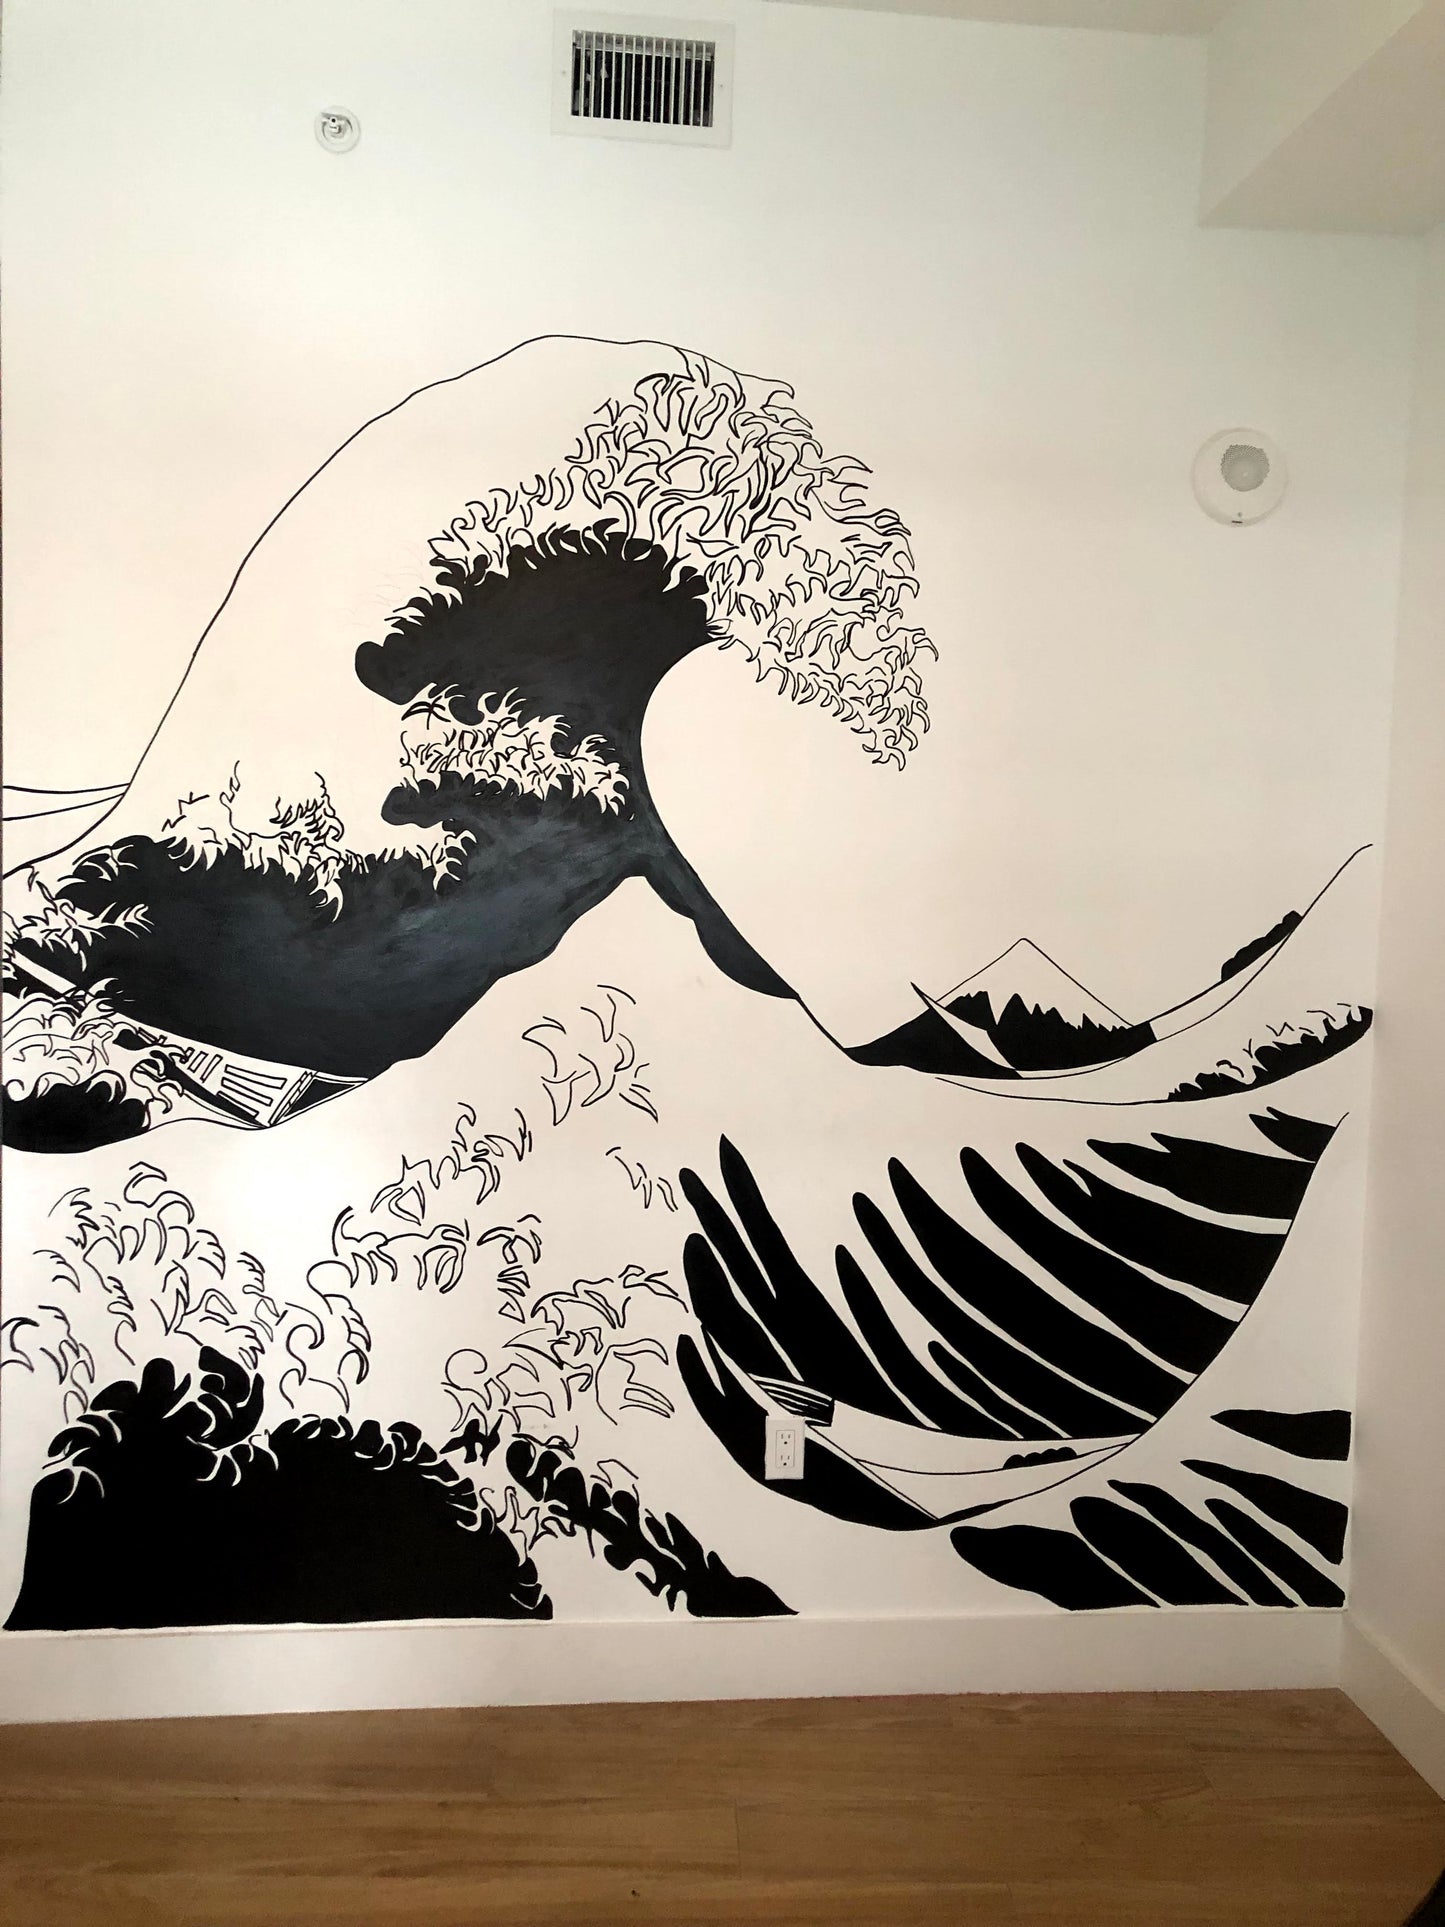 The Black Wave Mural